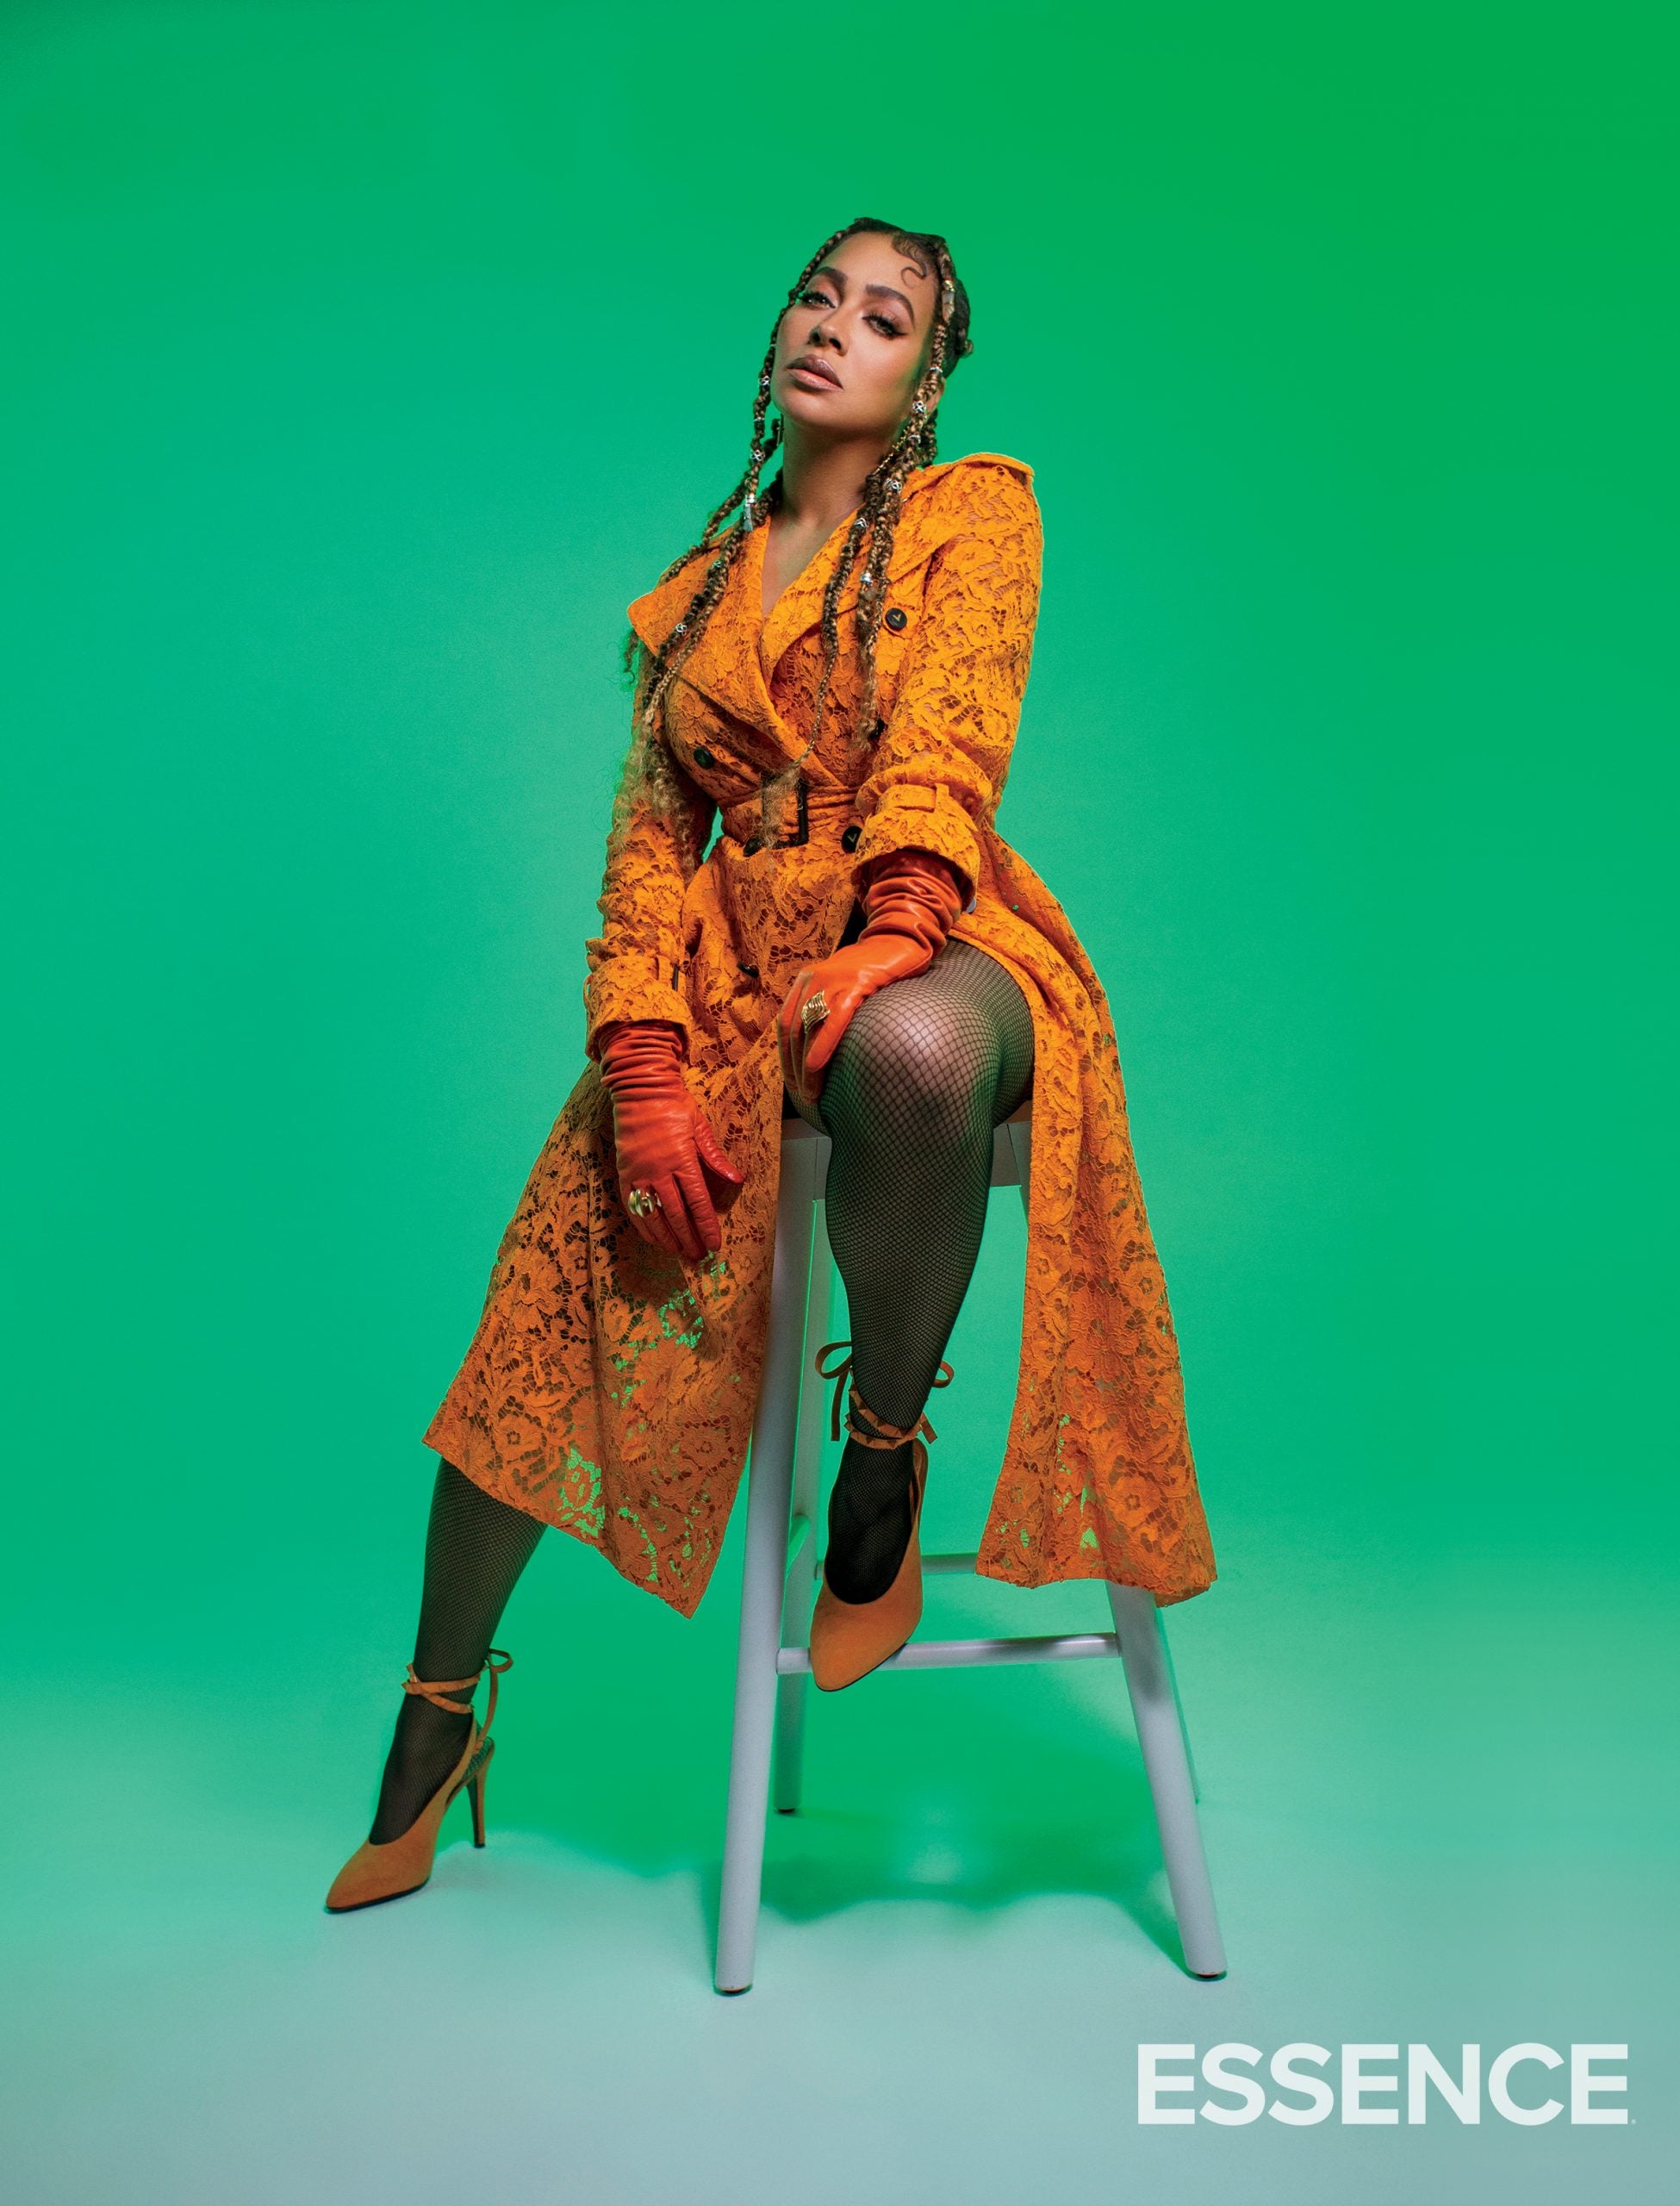 La La Anthony: Finding Success on Her Own Terms